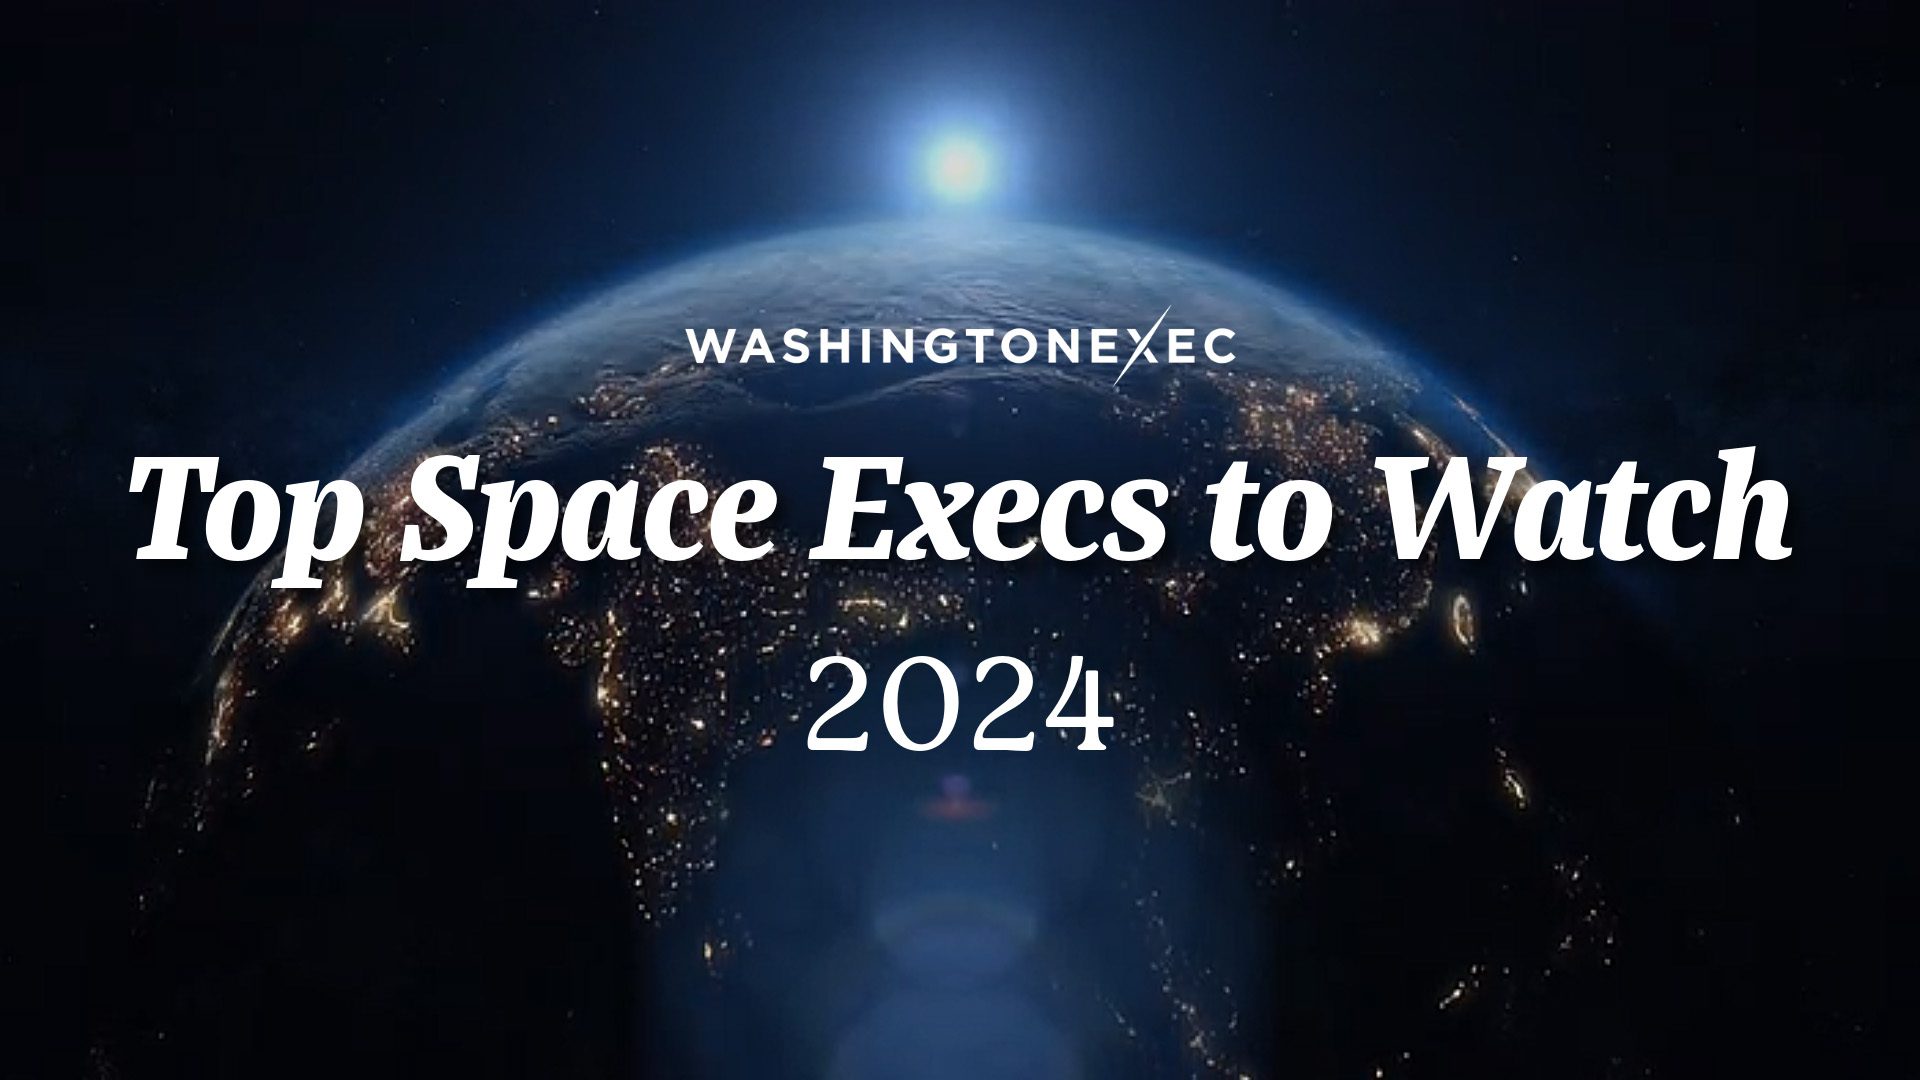 Top Space Execs to Watch in 2024